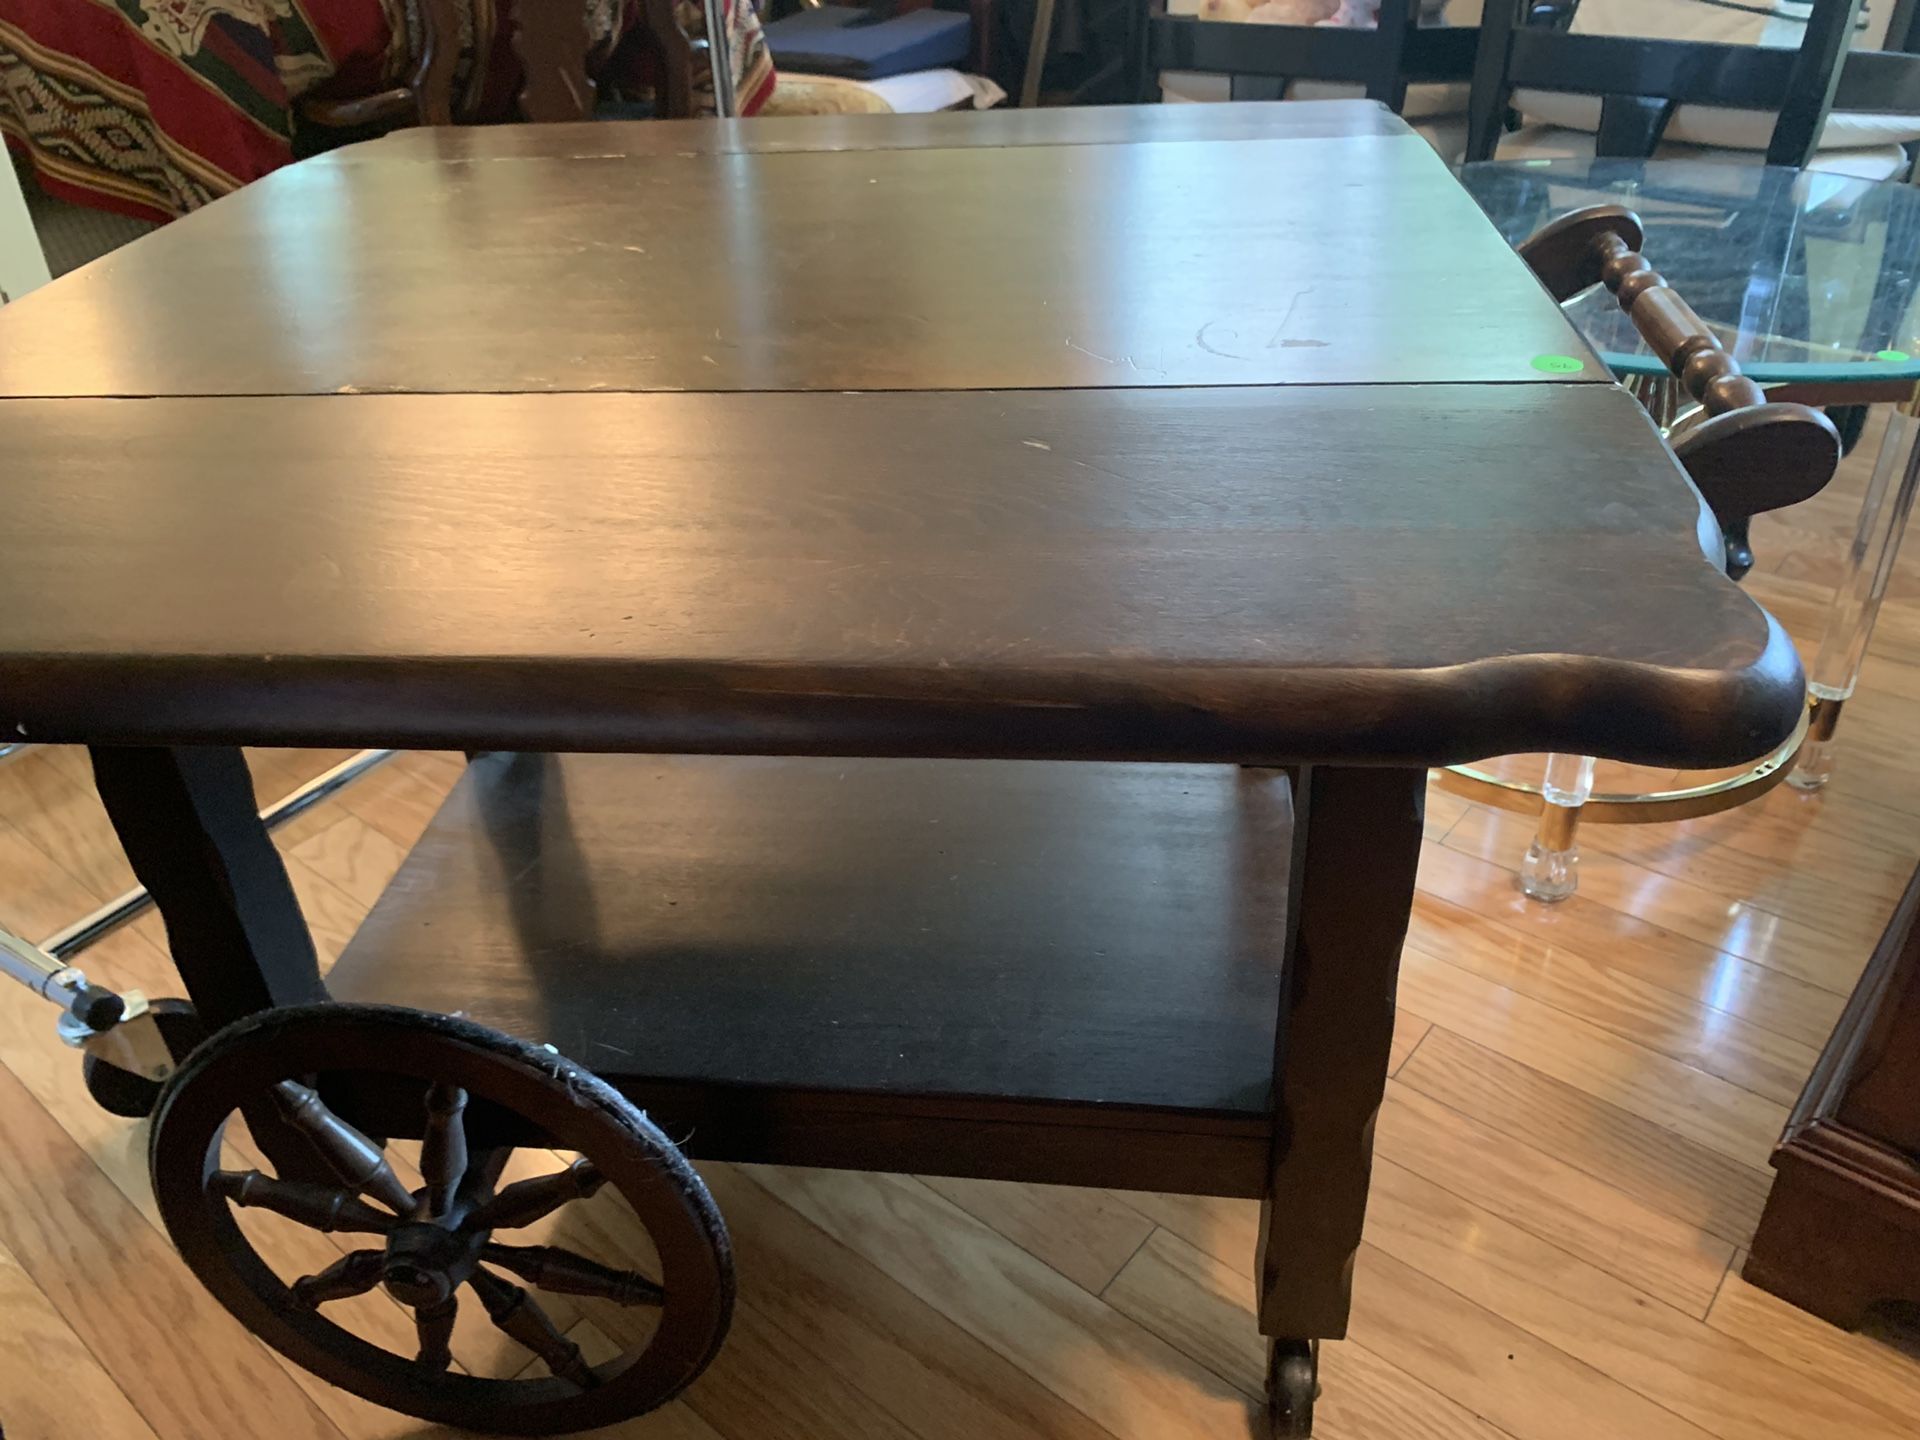 BEAUTIFUL MAHOGANY WOOD TEA CART/CONVERTS IN TO A TABLE WITH WHEELS!!!